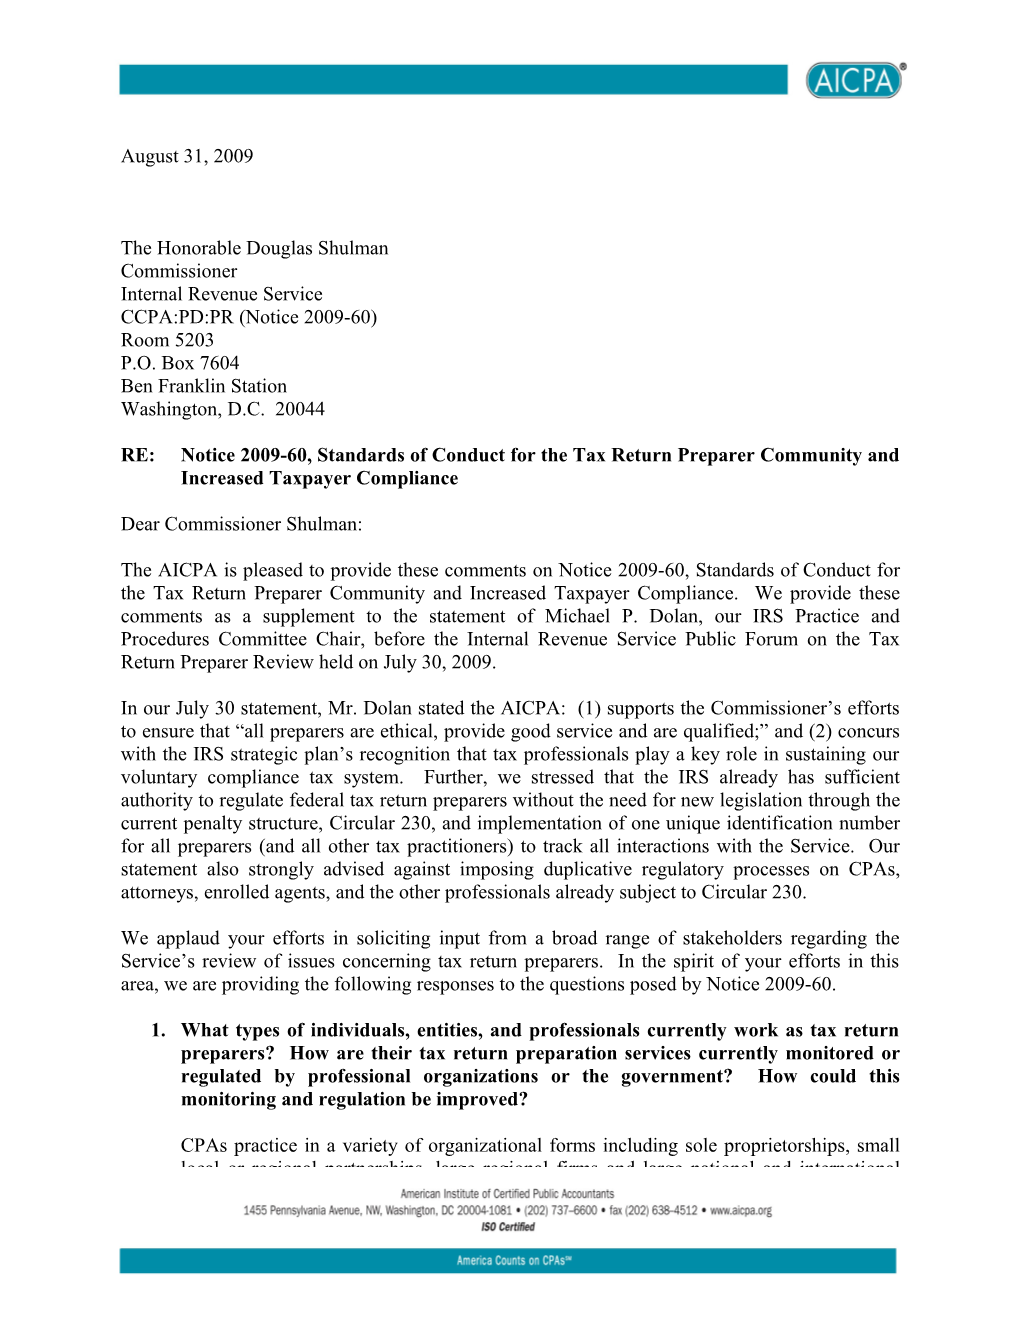 Letter from AICPA Tax Executive Committee to IRS Commissioner Shulman RE: Notice 2009-60